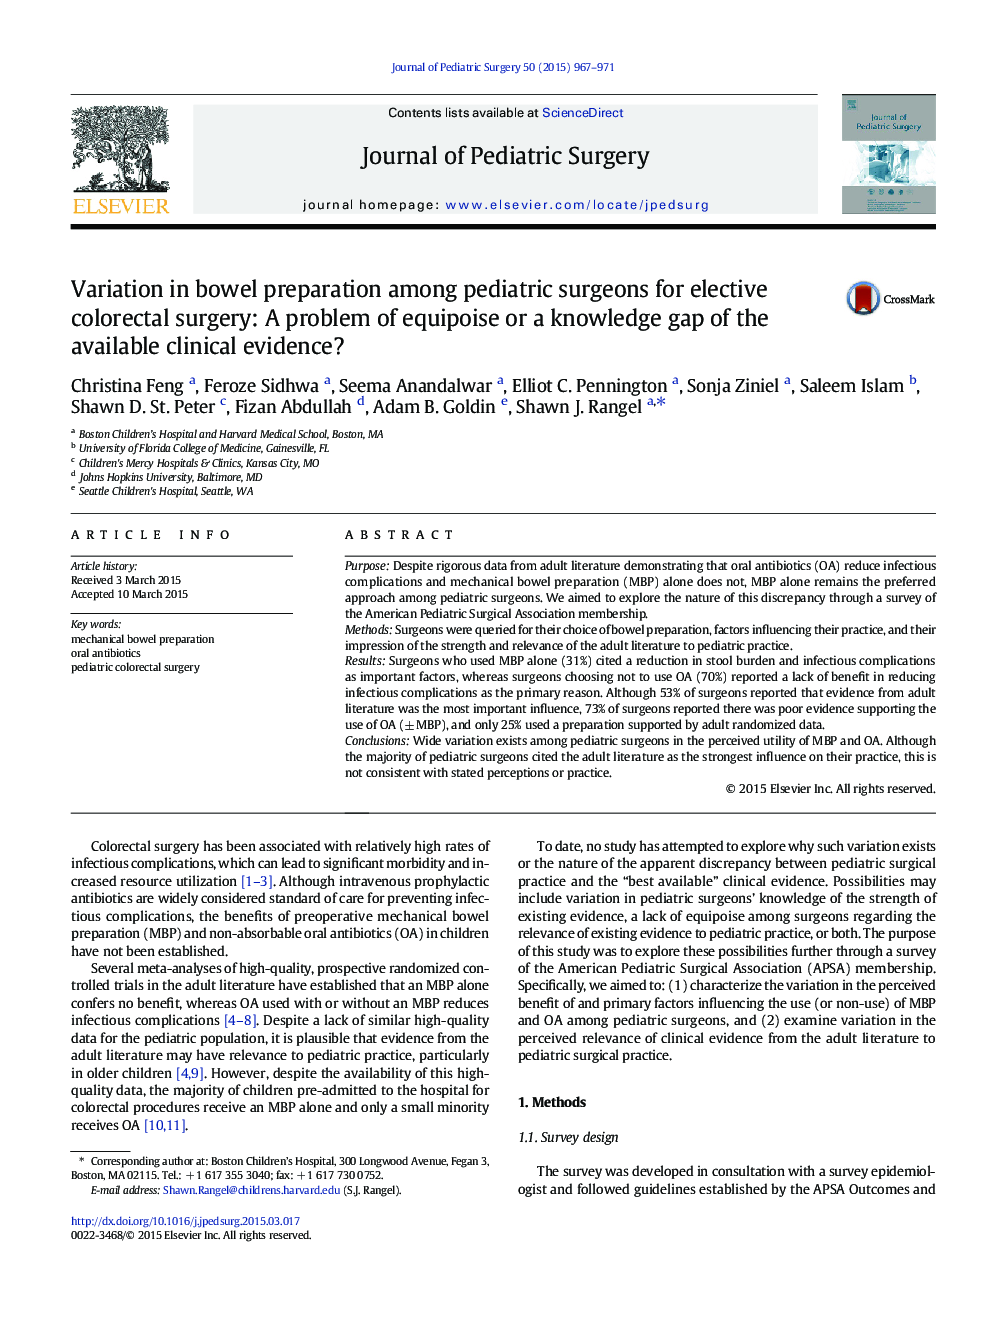 Variation in bowel preparation among pediatric surgeons for elective colorectal surgery: A problem of equipoise or a knowledge gap of the available clinical evidence?